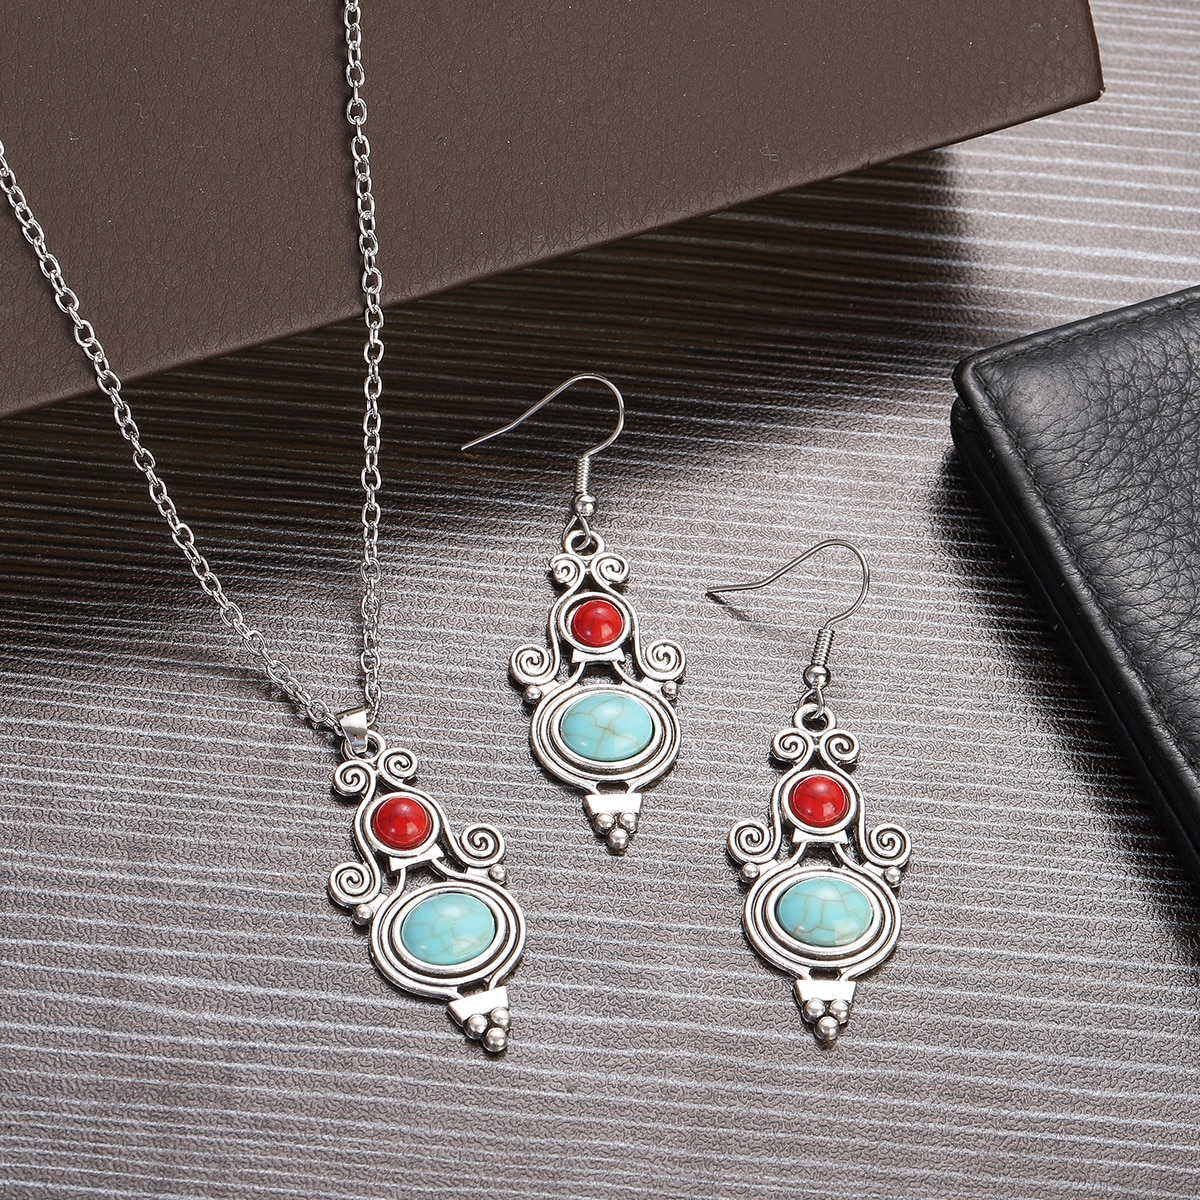 Ethnic-Boho-Red-Blue-Stone-Pendant-Necklace-Earring-Set-Women-Girls-Silver-Color-Geometric-Jewelry-S-1005004921122202-3